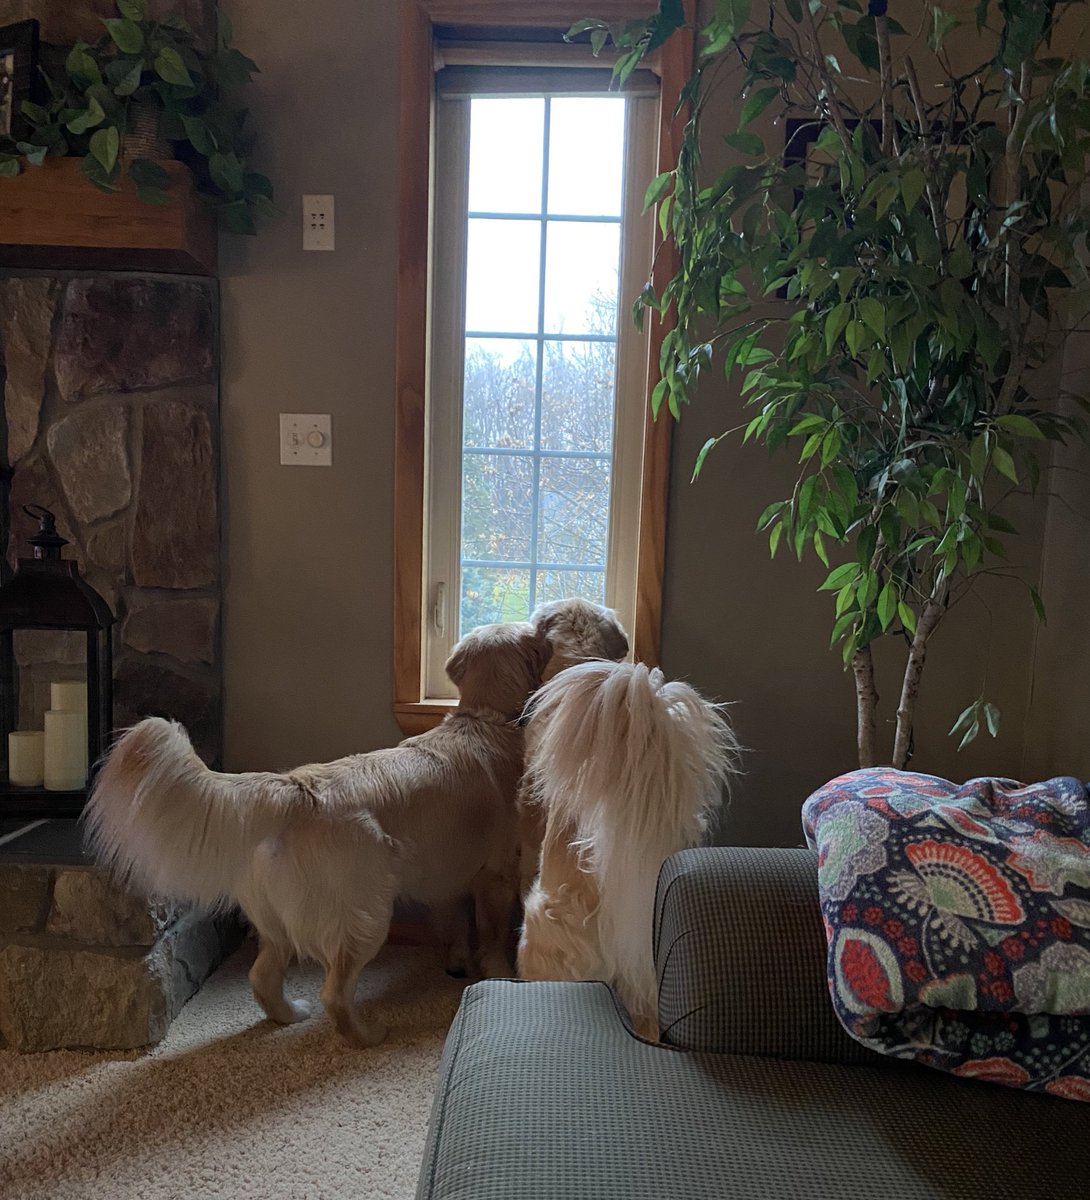 #FluffyButtFriday Yard patrol from inside today frens. Too rainy to do an adequate patrol outside. (And Captain Chaos gets too dirty) #lessmurraymorewalter #lessmurraylessrain